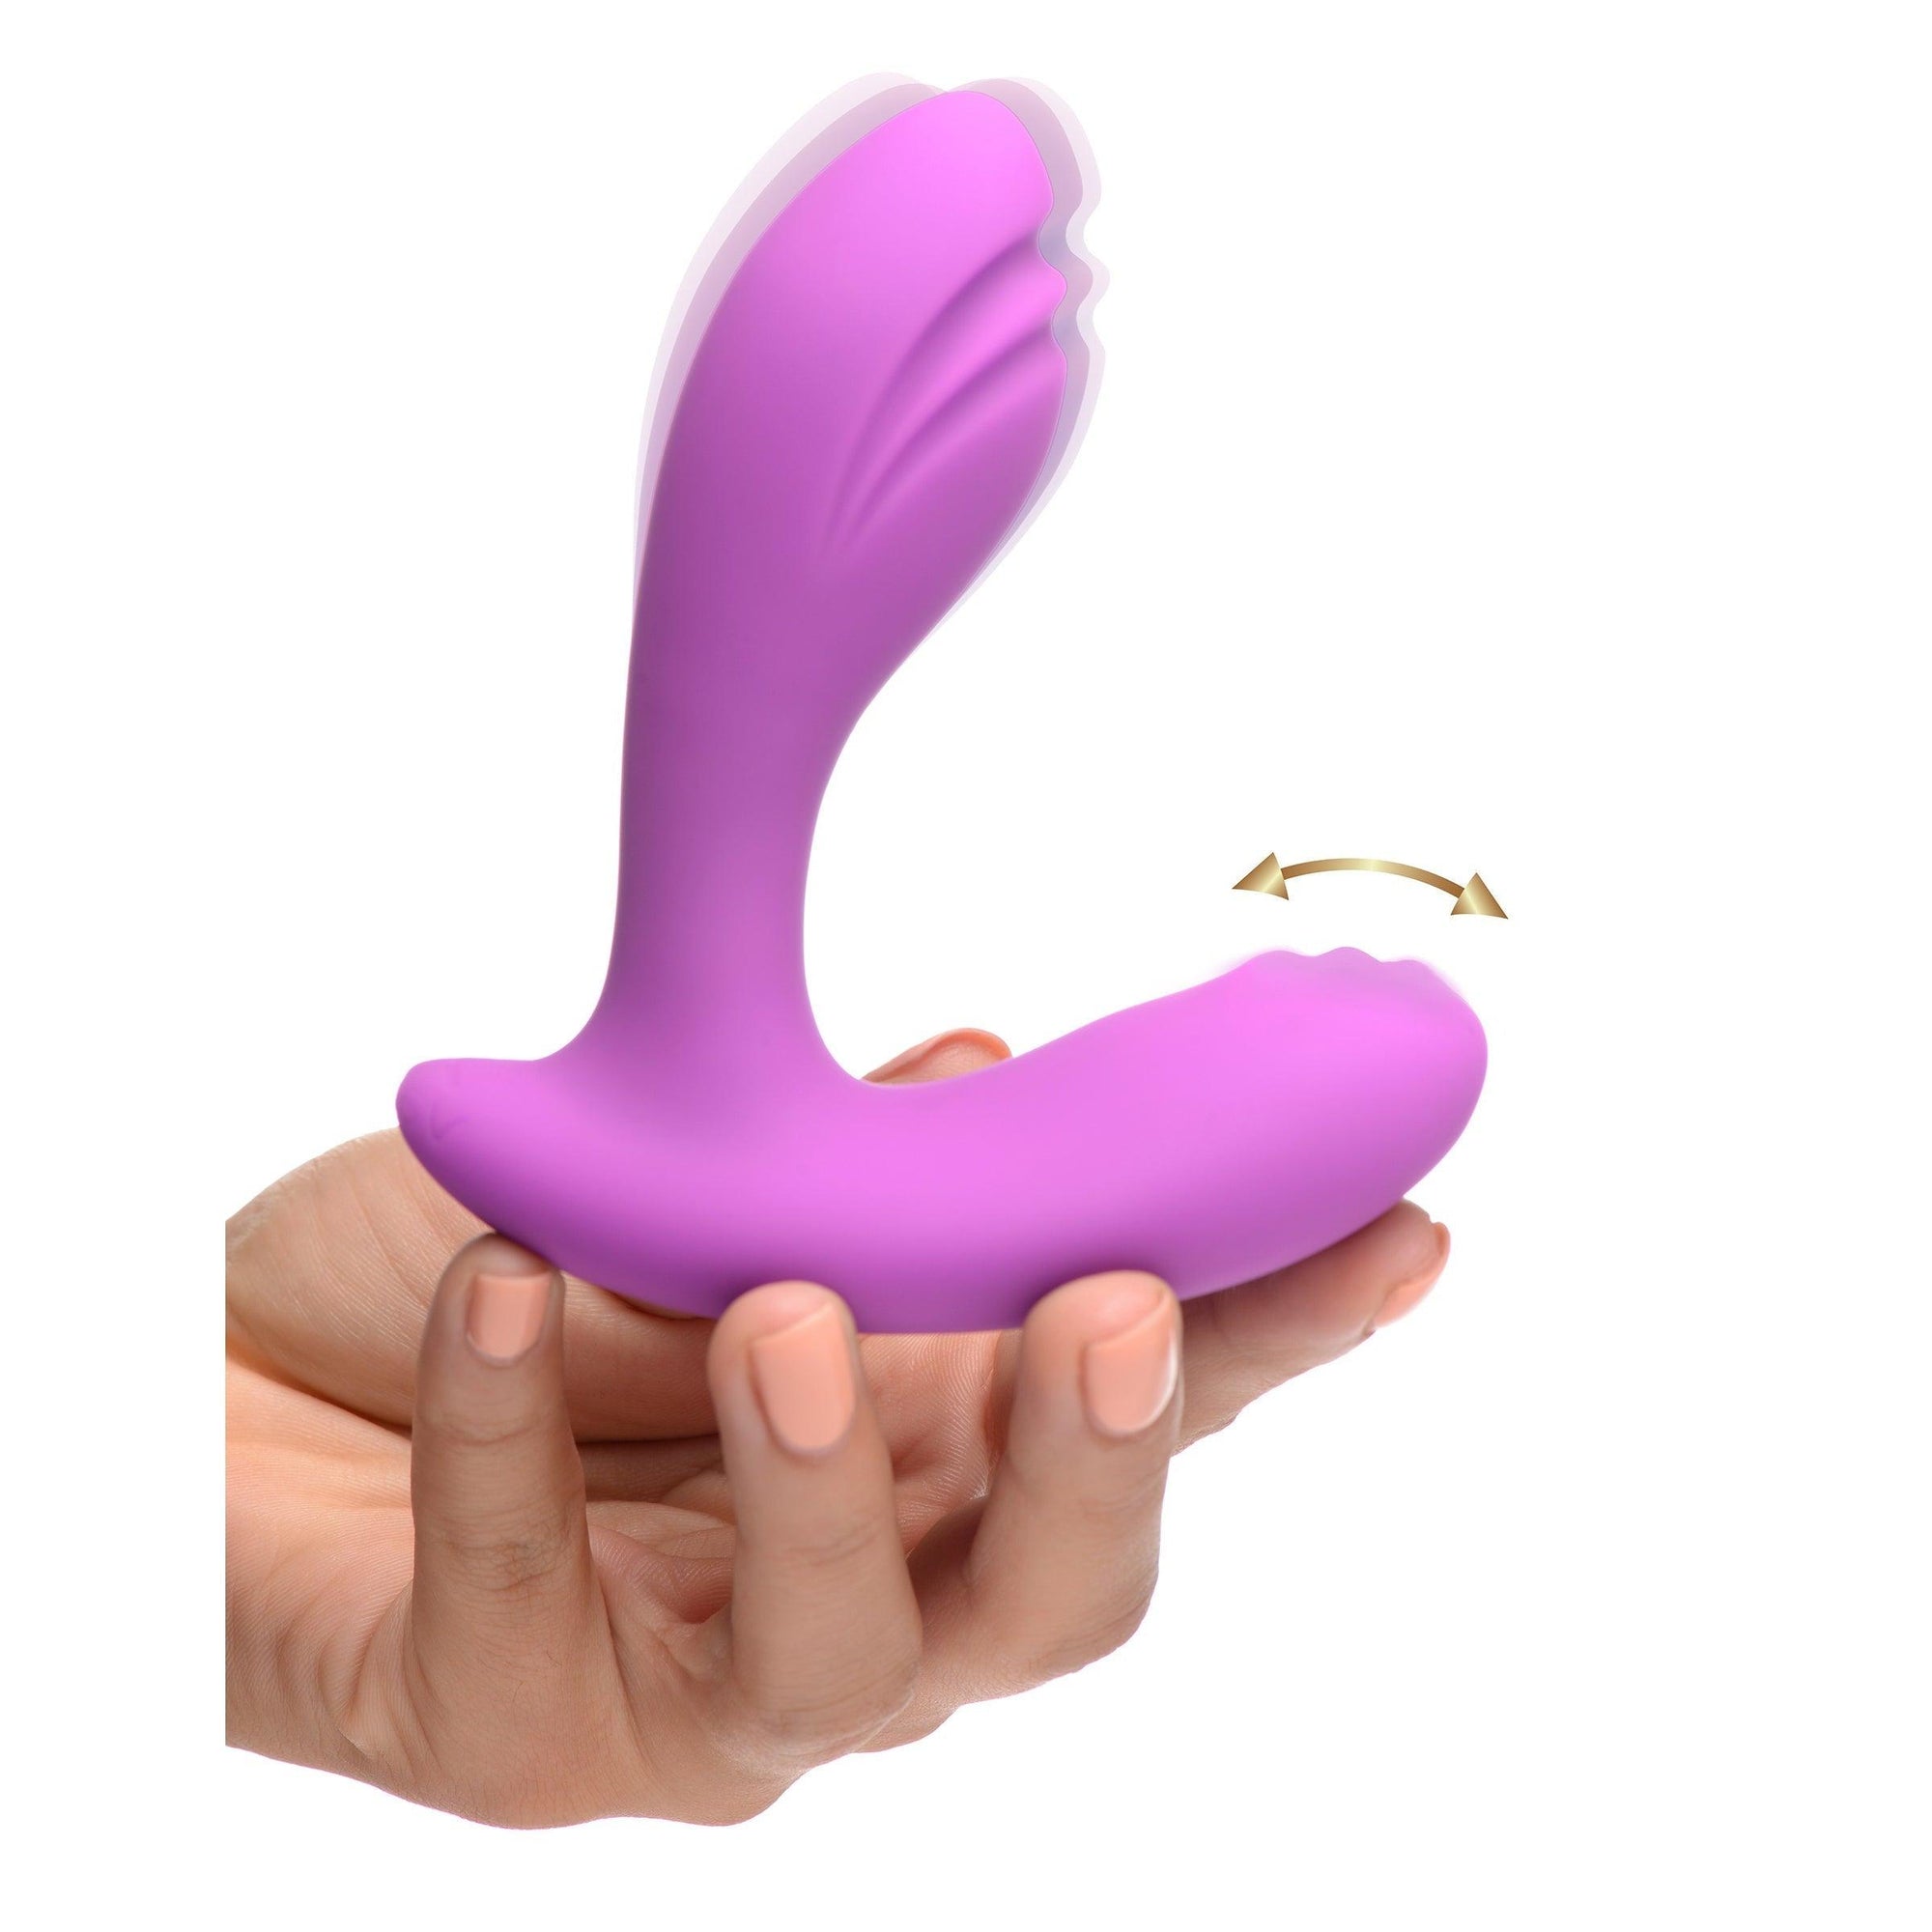 10X G-Pearl G-Spot Stimulator with Moving Beads